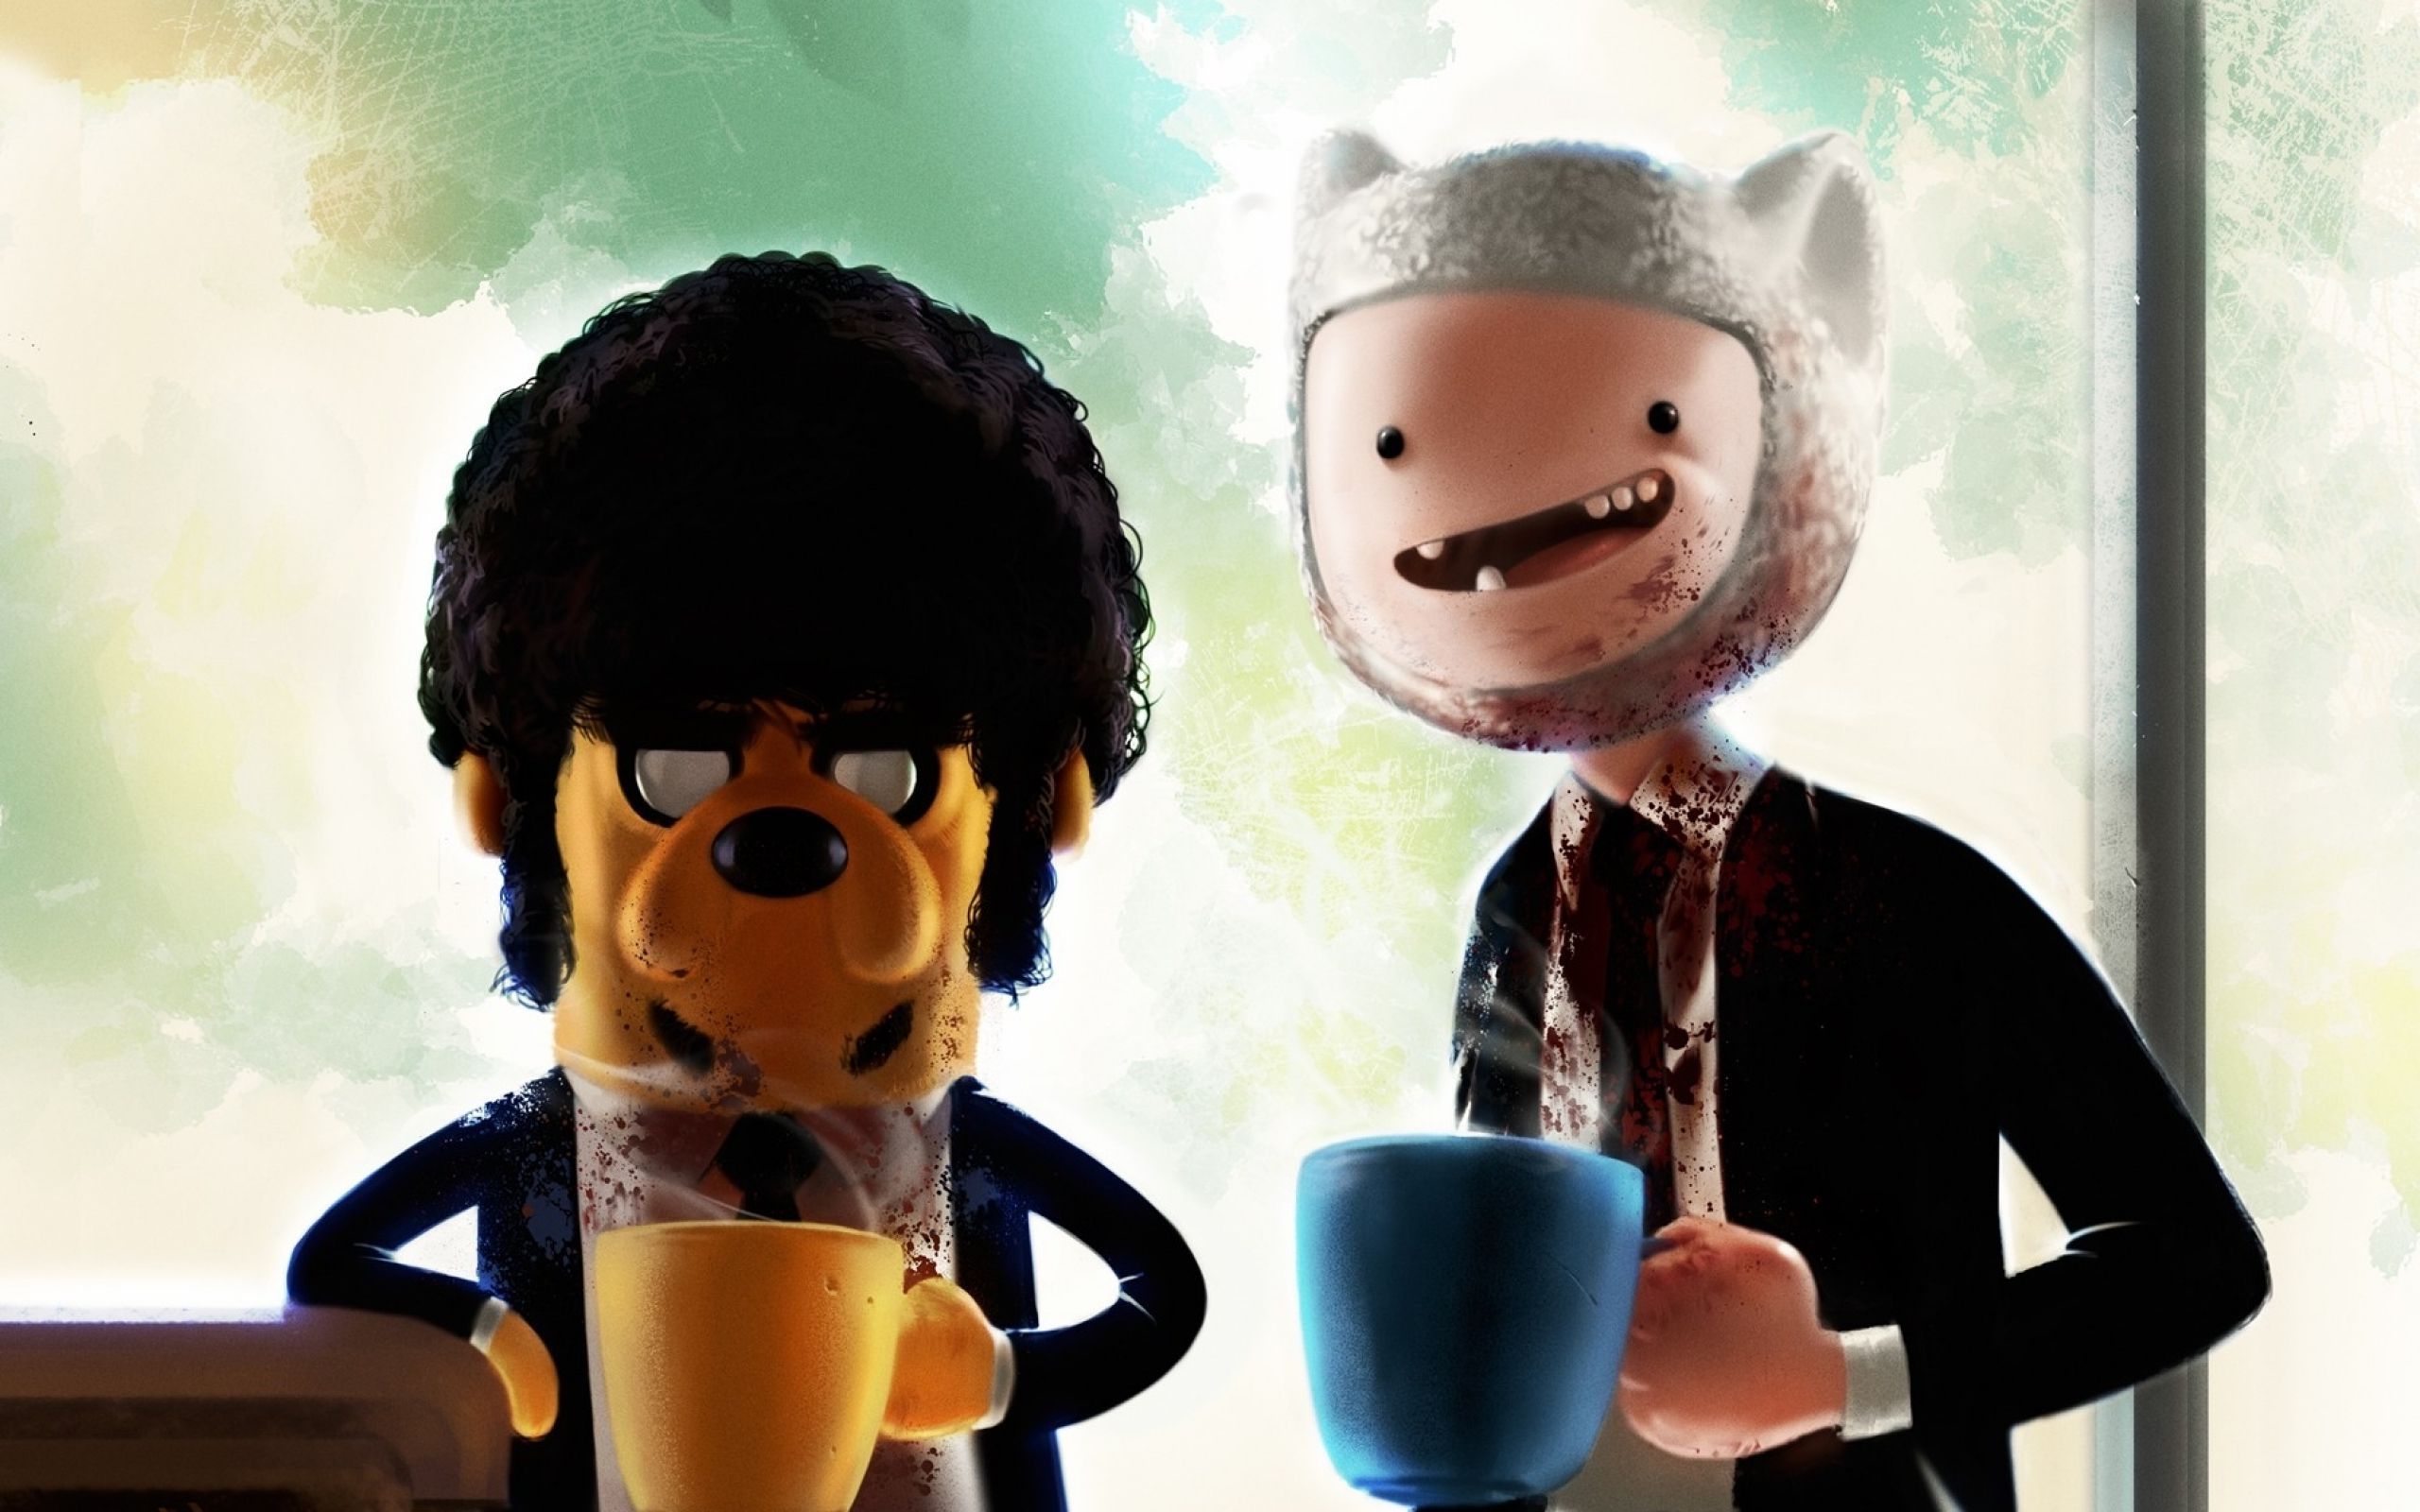 Adventure Time Pulp Fiction Crossover - Funny Adventure Time Crossovers - HD Wallpaper 